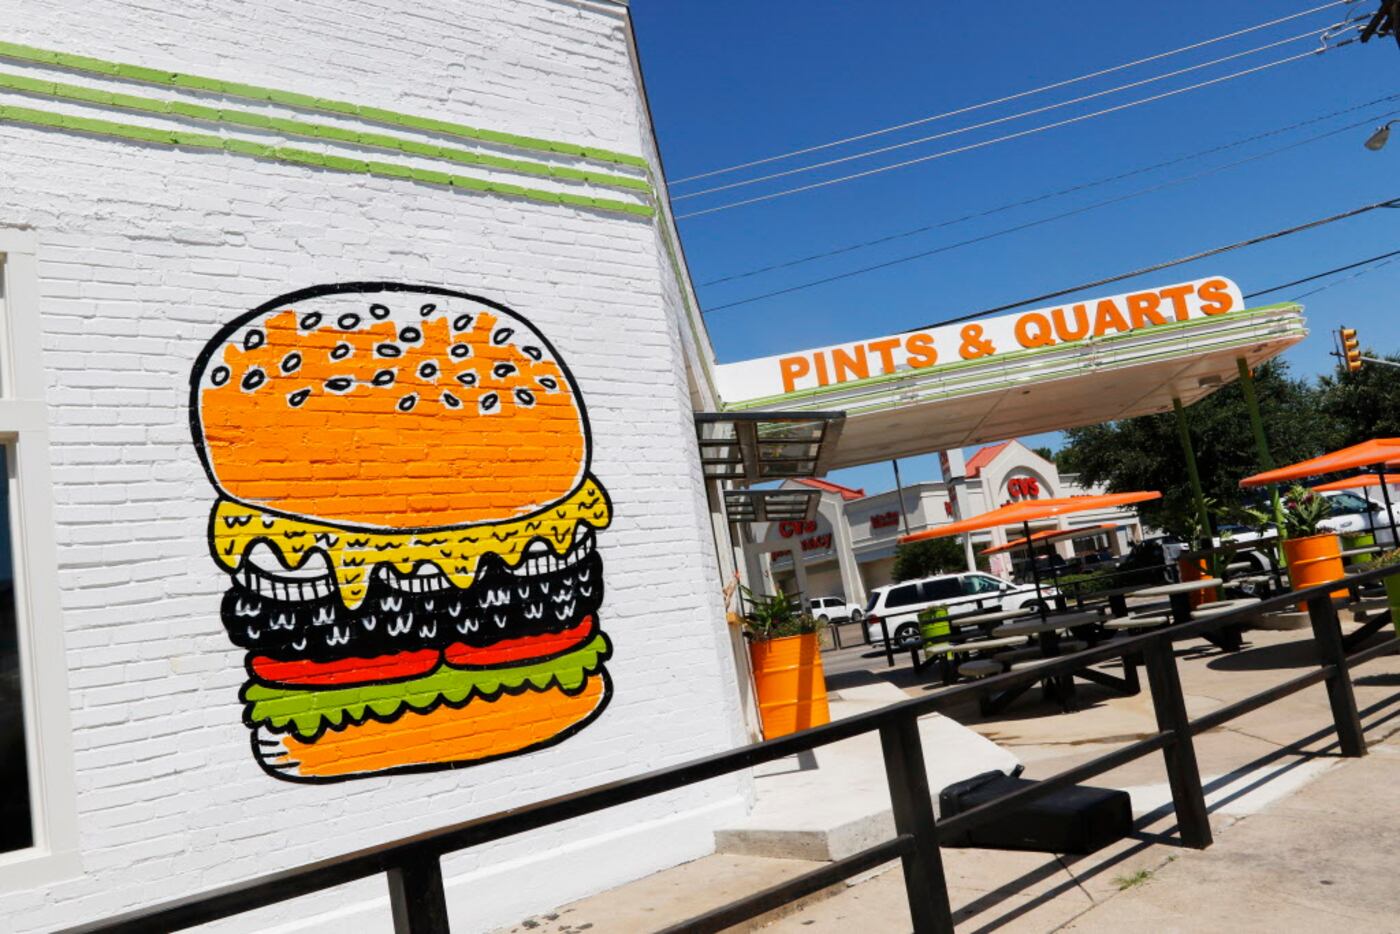 Pints & Quarts, a new restaurant in Dallas located at Ross Ave. and Greenville Ave opened on...